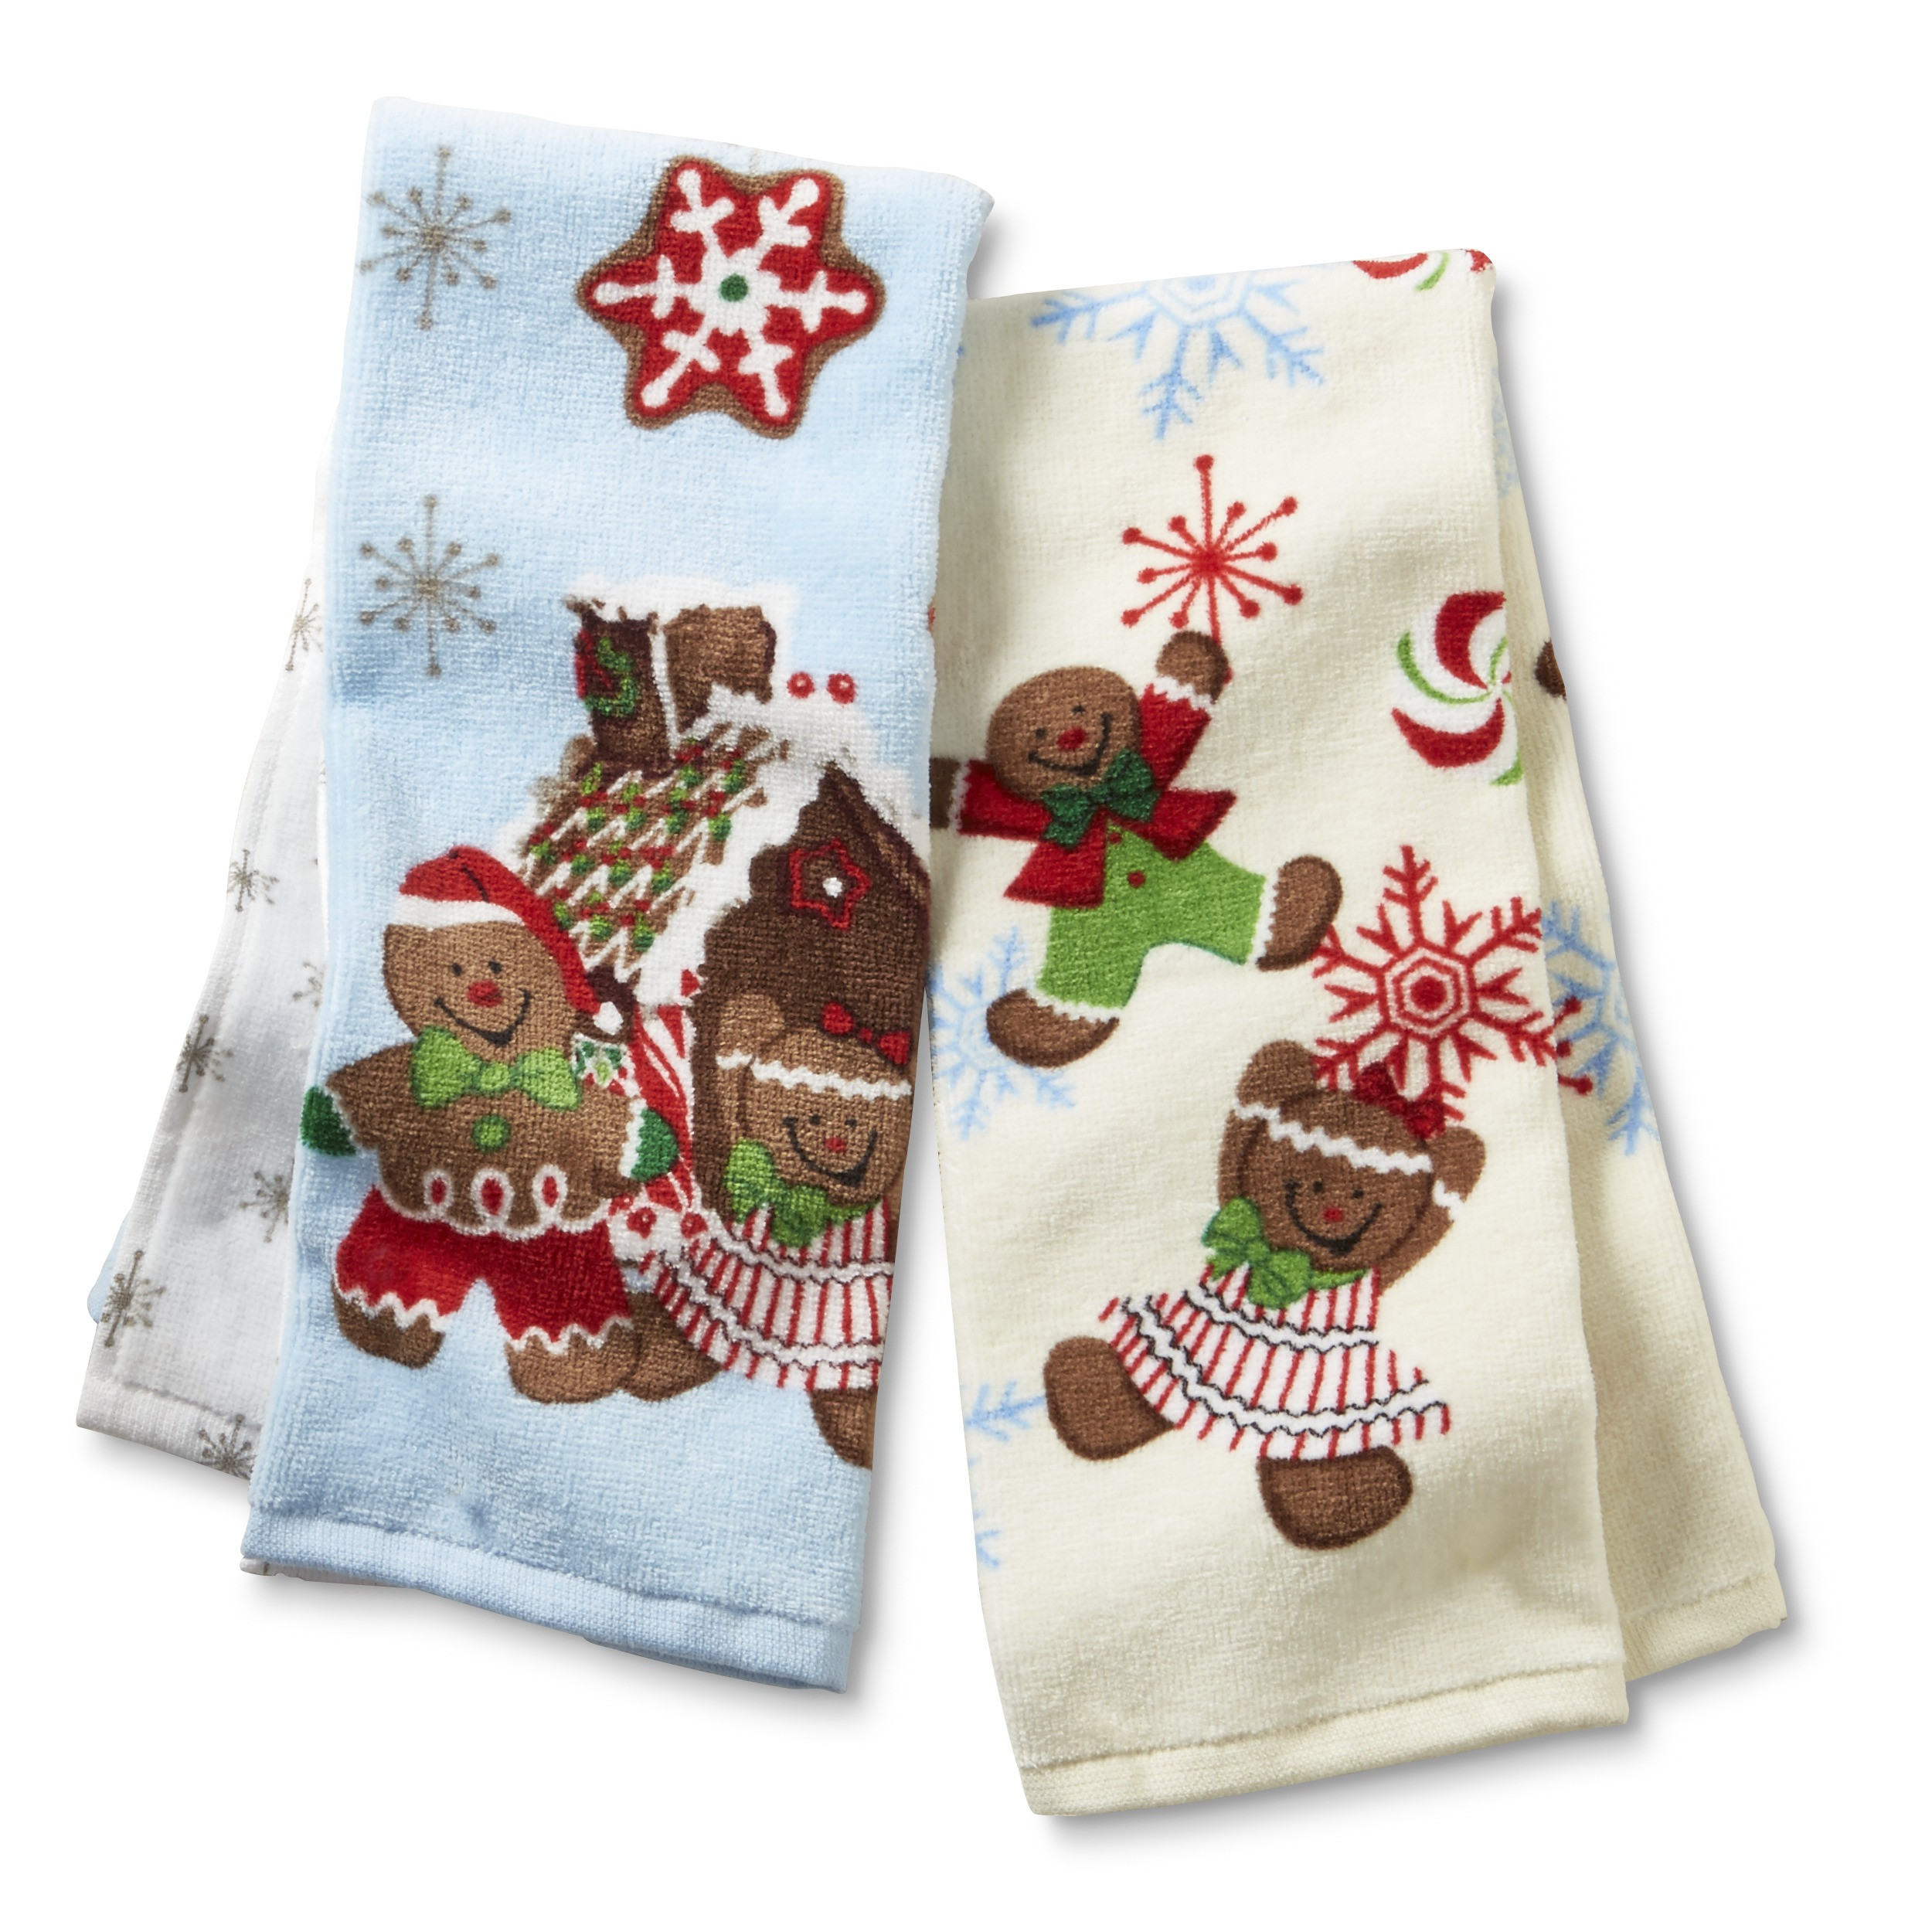 Christmas Kitchen Towels
 Trim A Home 2 Pack Christmas Kitchen Towels Gingerbread